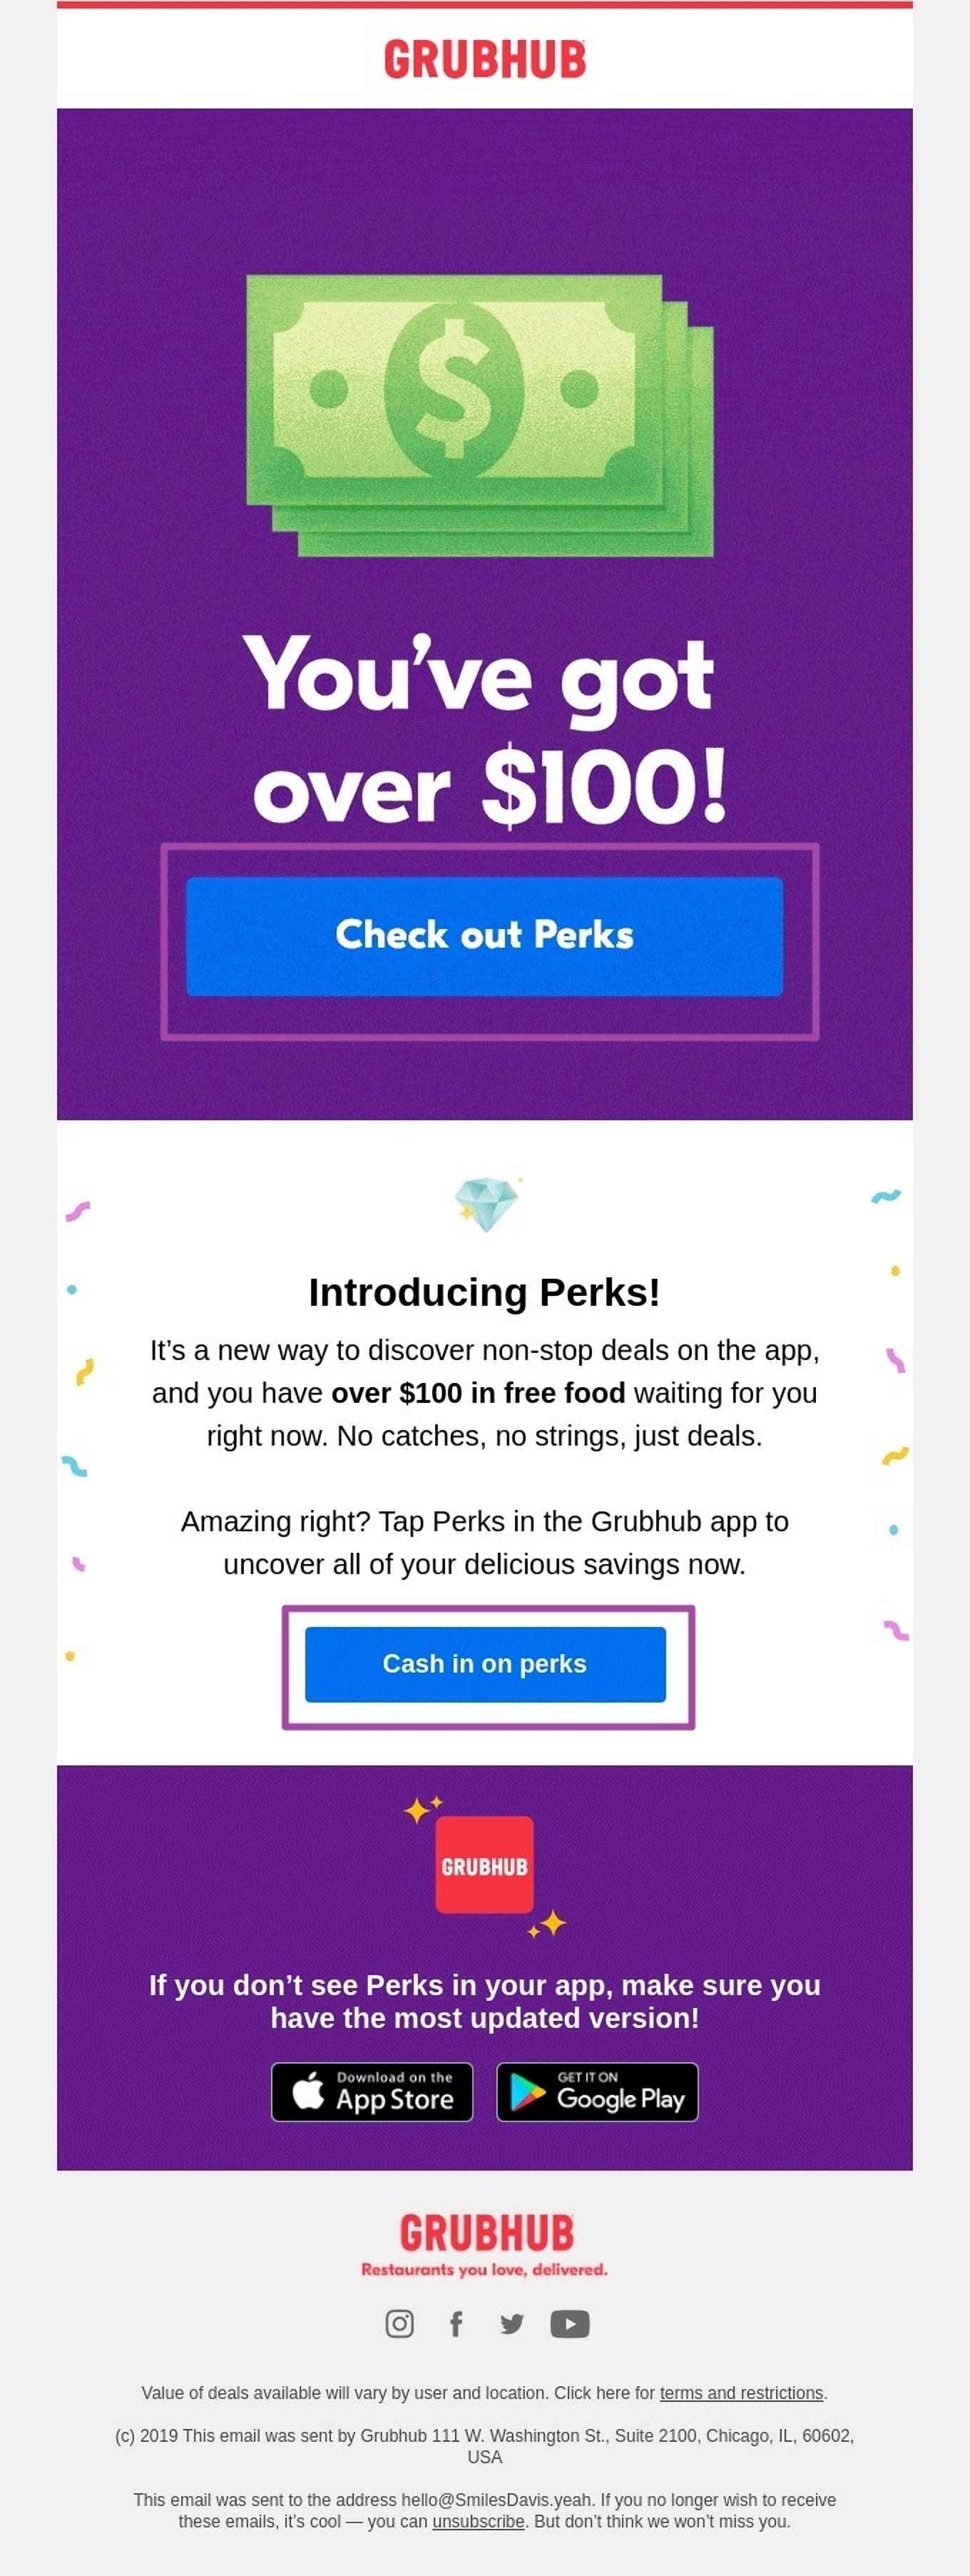 Excellent email example from Grubhub